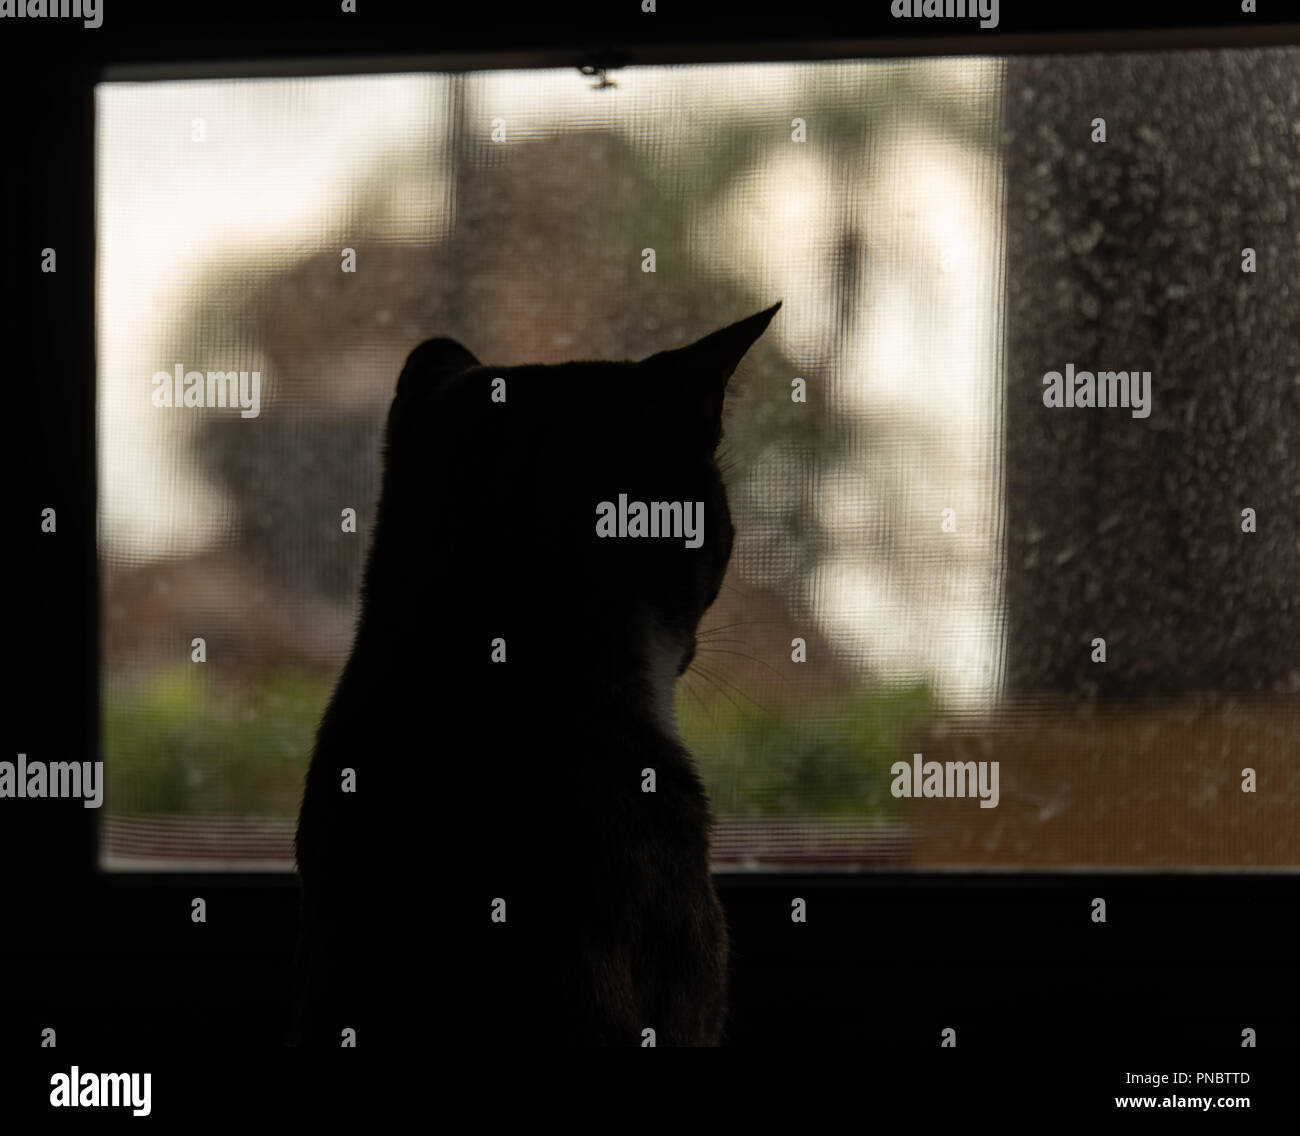 Cat Silhouette By Window On Rainy Day Stock Photo